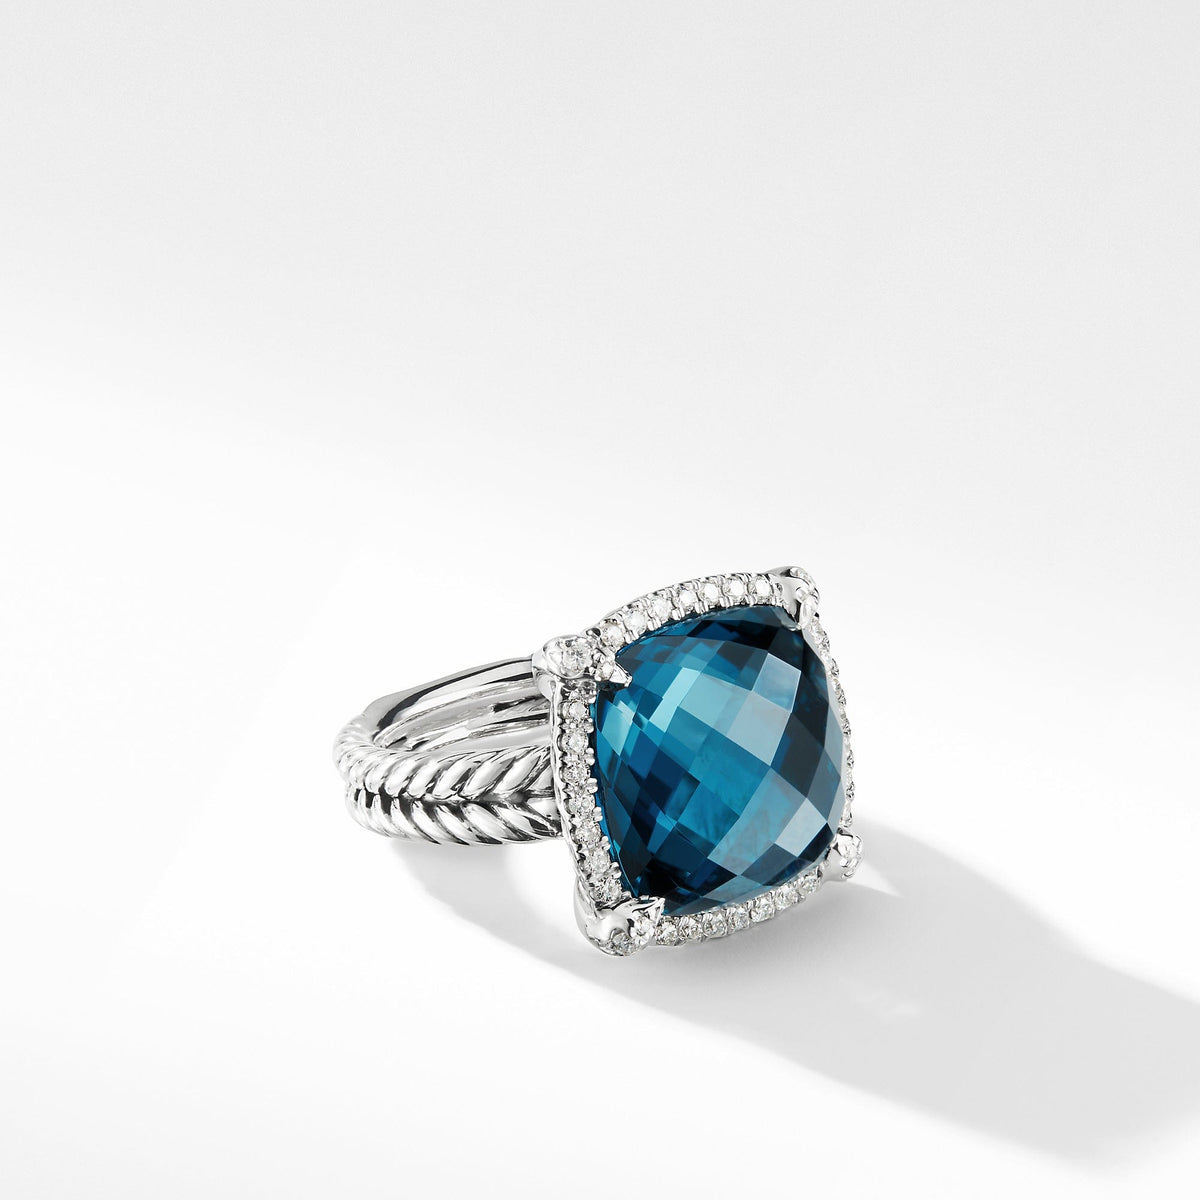 Chatelaine Pave Bezel Ring with Hampton Blue Topaz and Diamonds, 14mm, Sterling Silver, Long's Jewelers